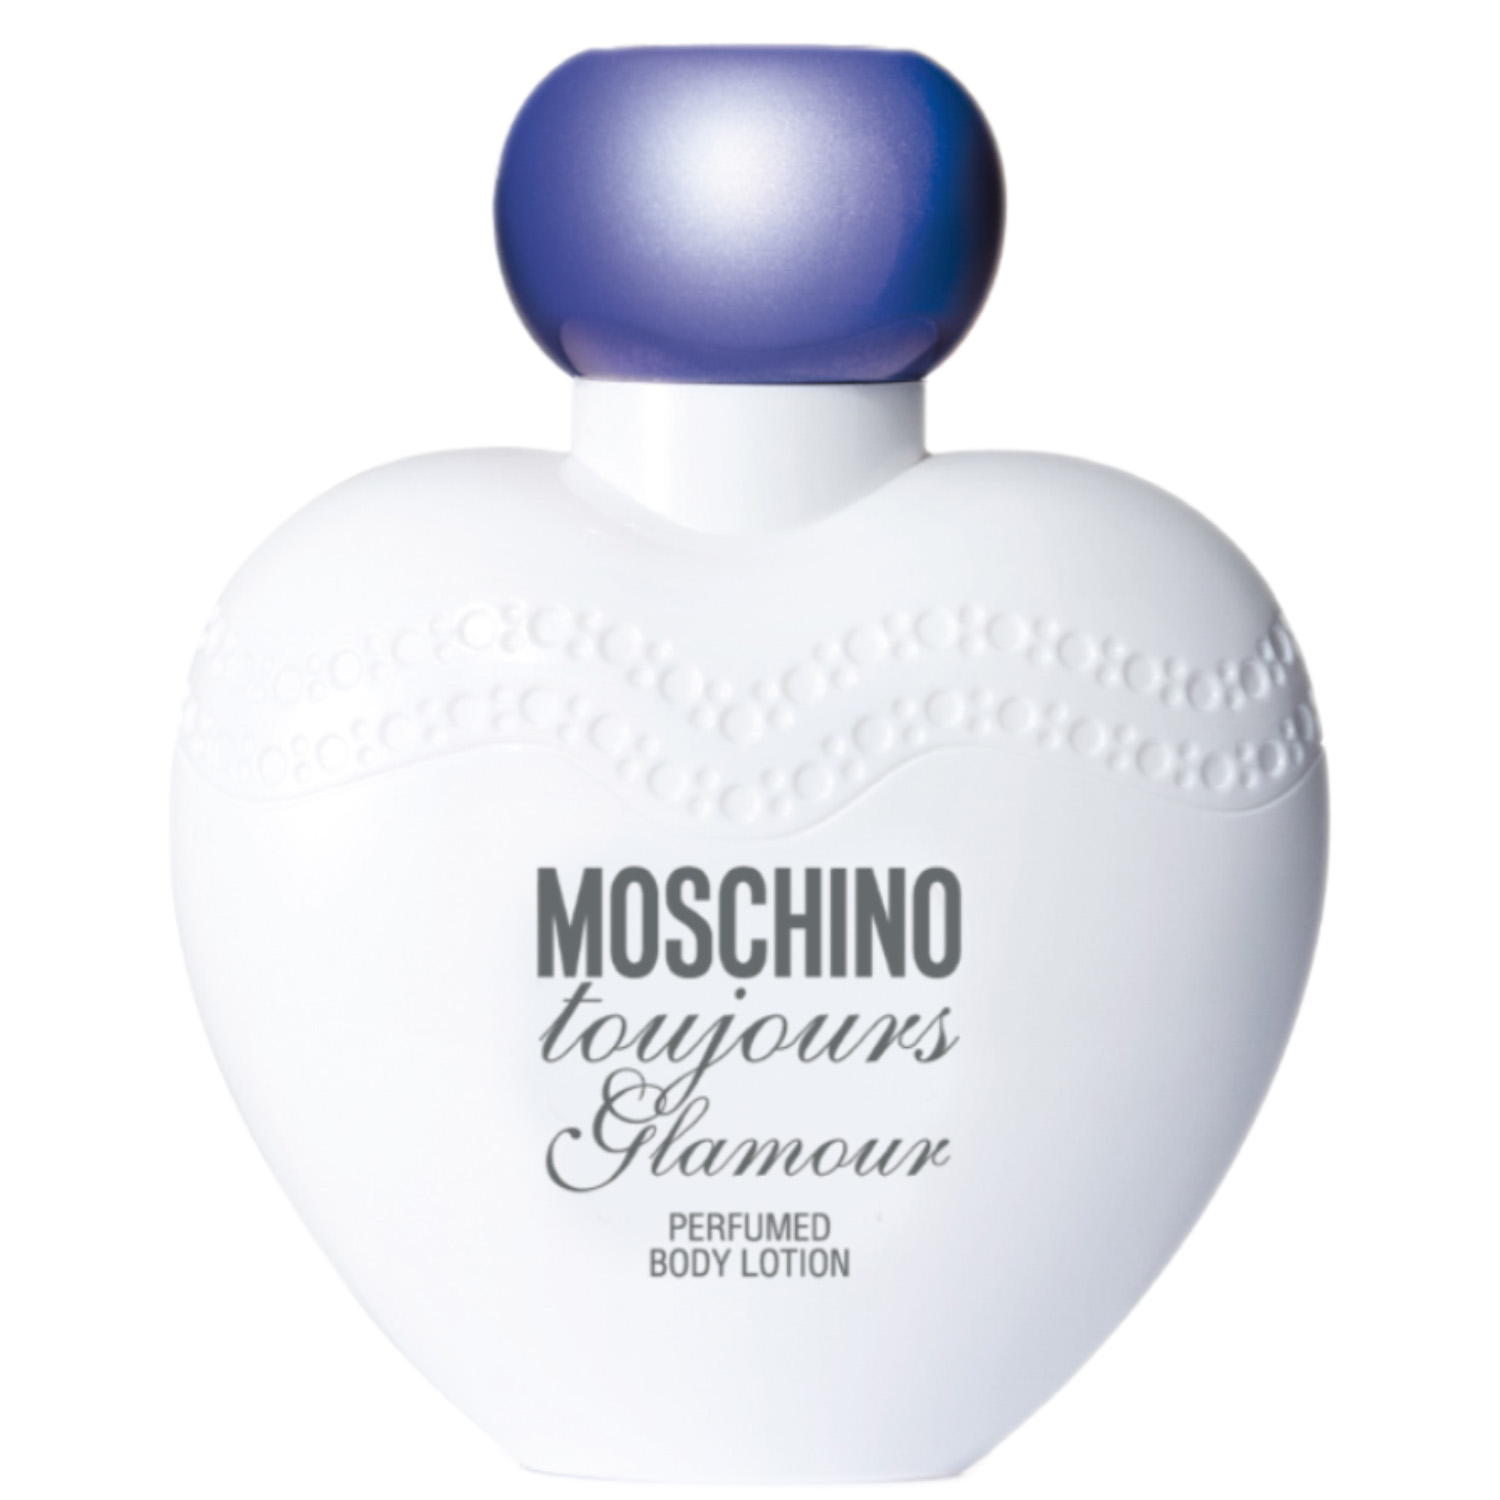 Moschino Toujours Glamour Body Lotion 200ml